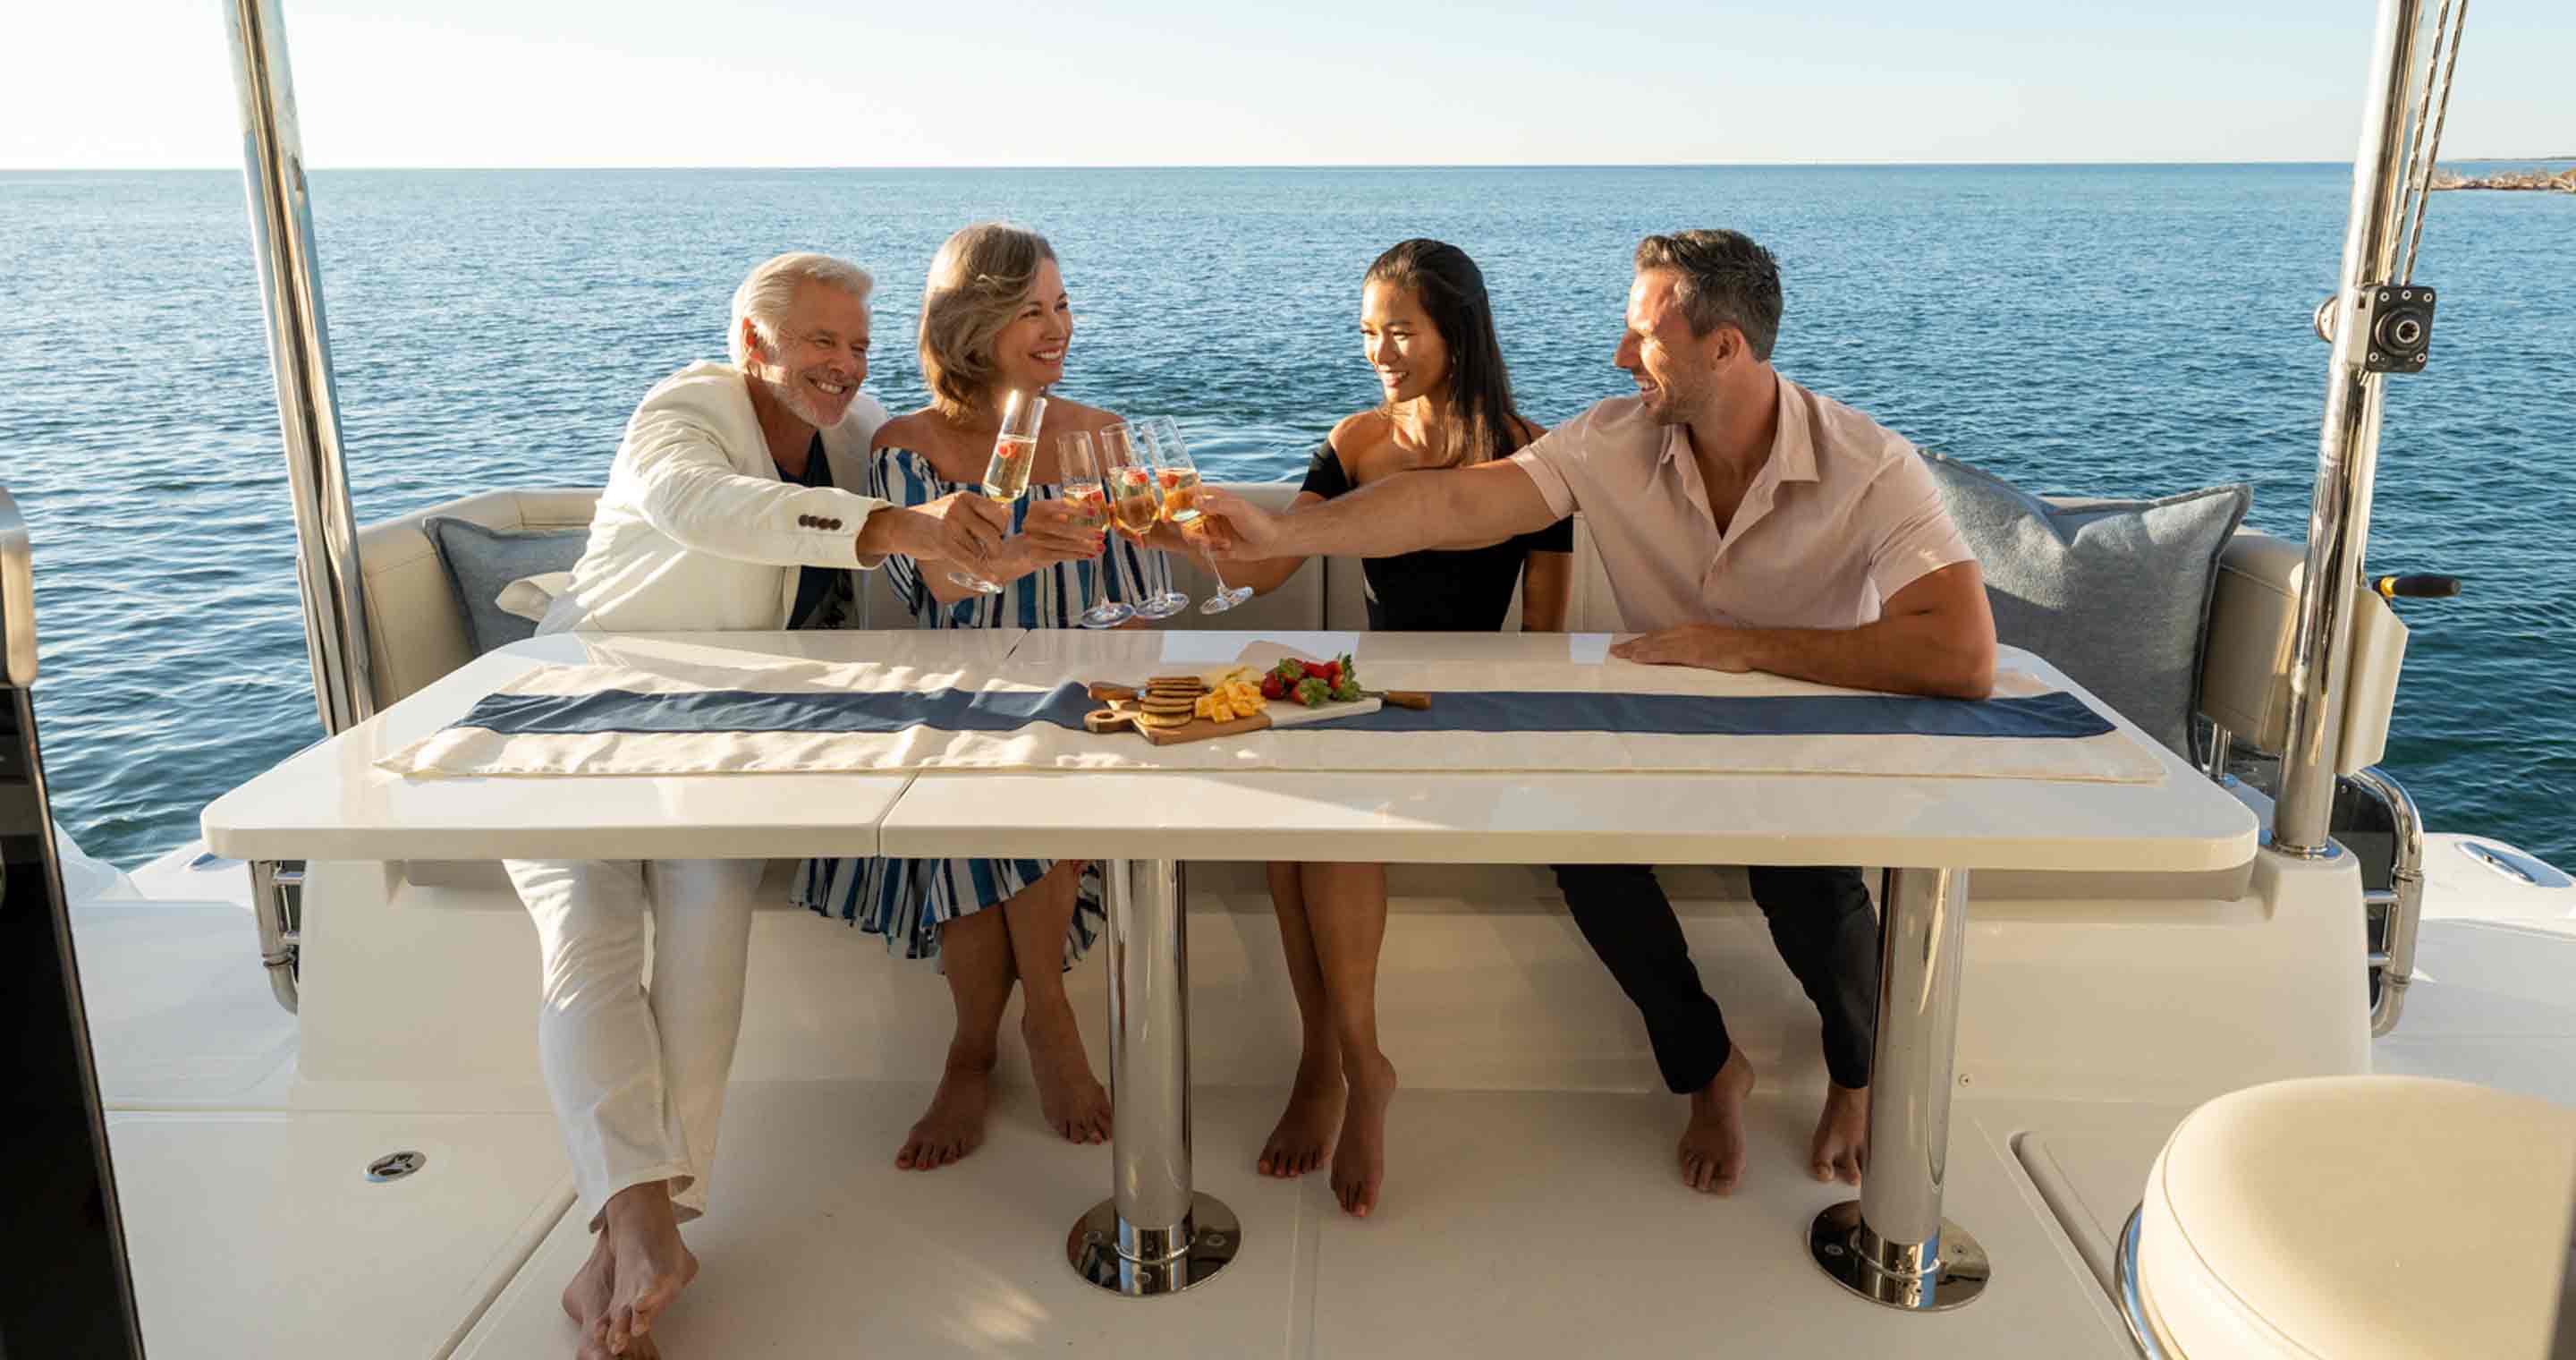 four people sitting at a table on a boat clanking glasses